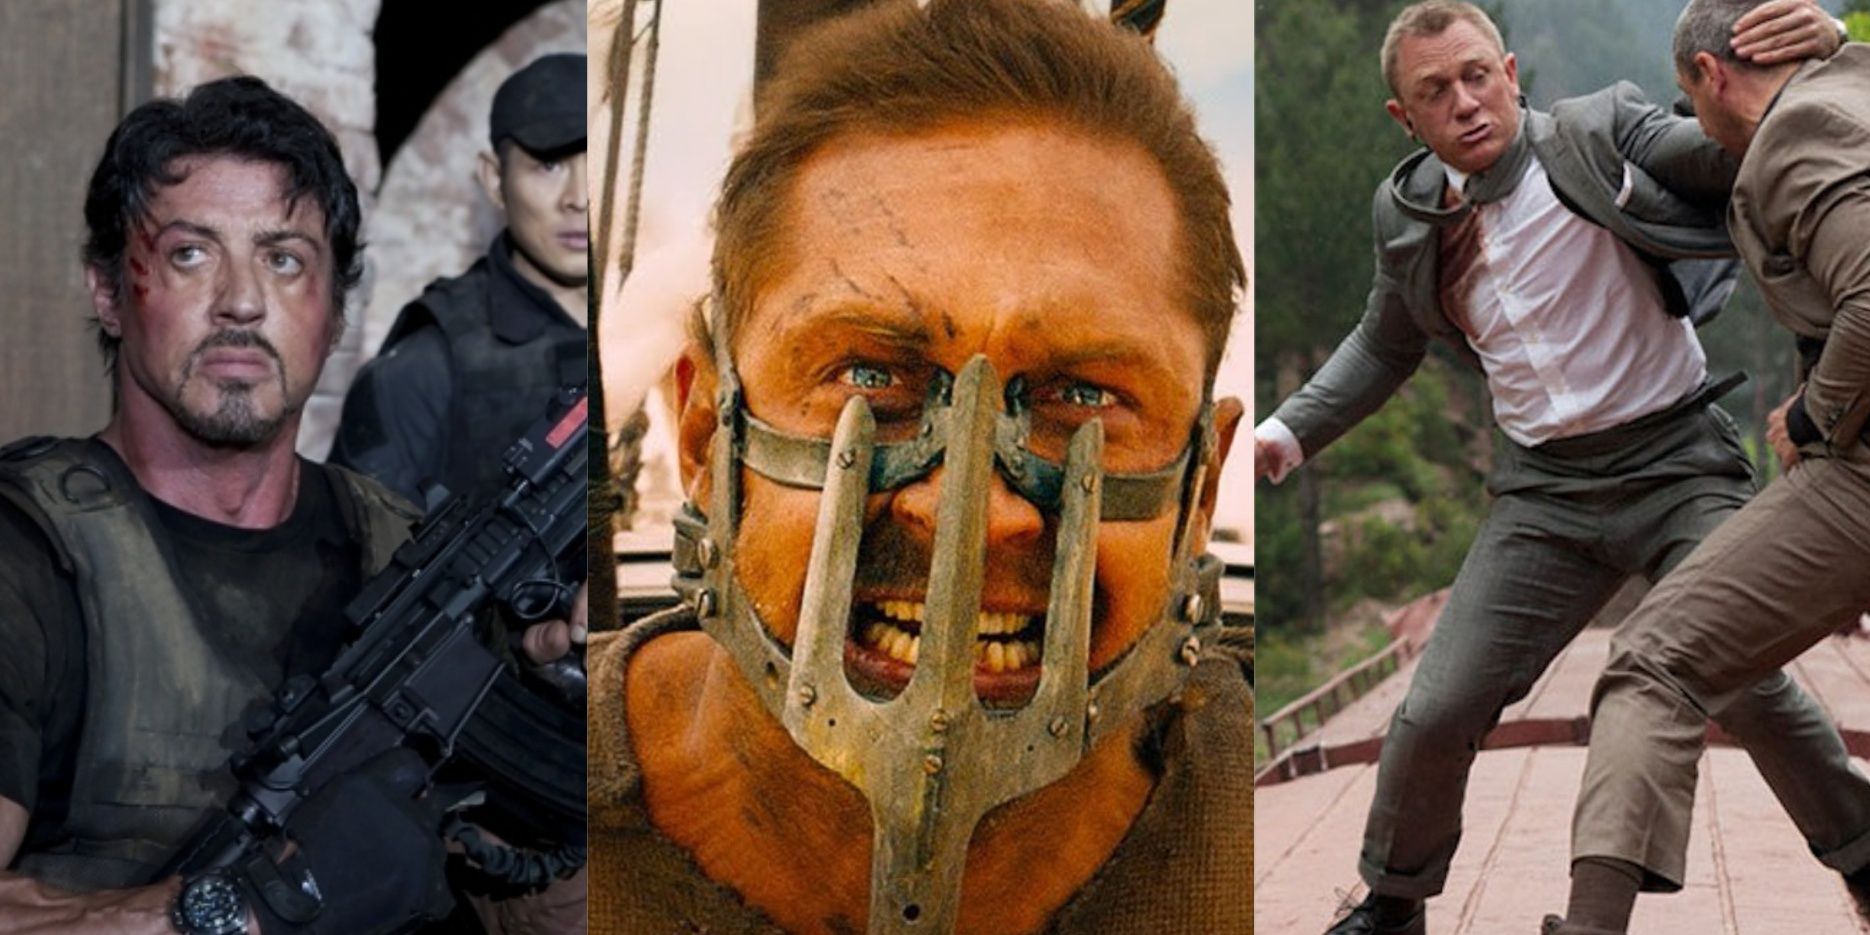 Split images of The Expendables, Mad Max Fury Road, and Skyfall